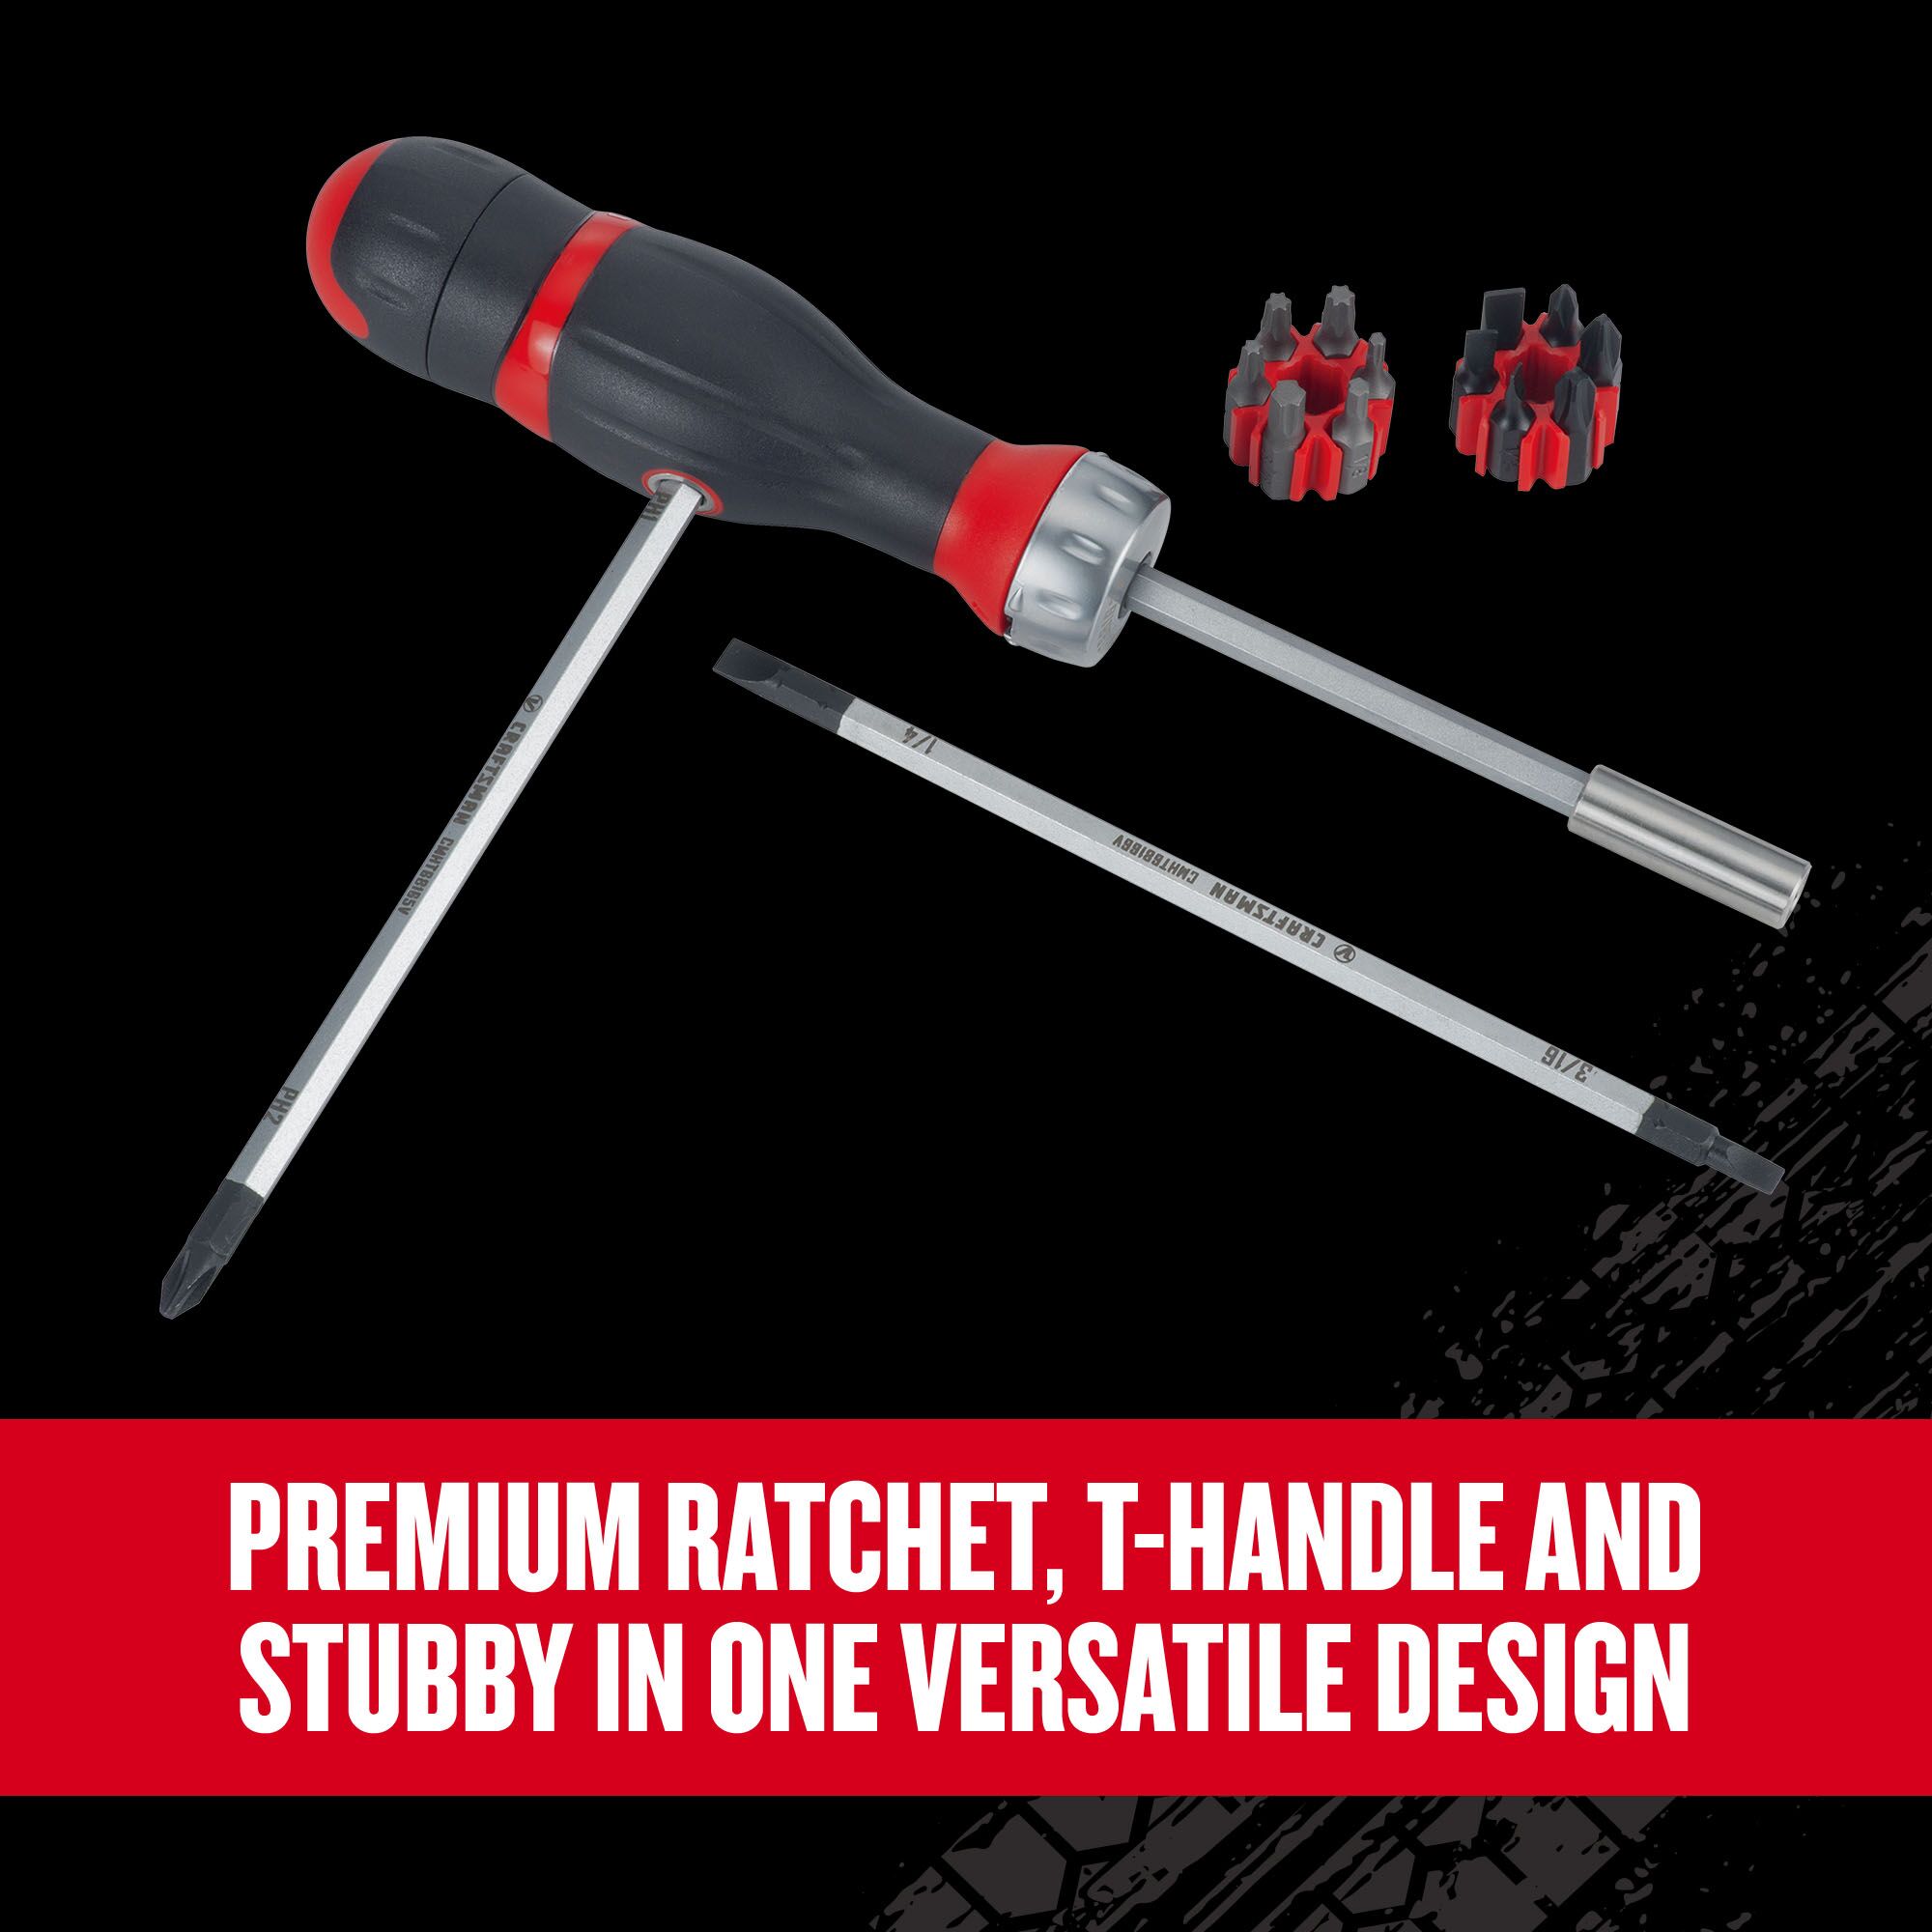 Graphic of CRAFTSMAN Screwdrivers highlighting product features